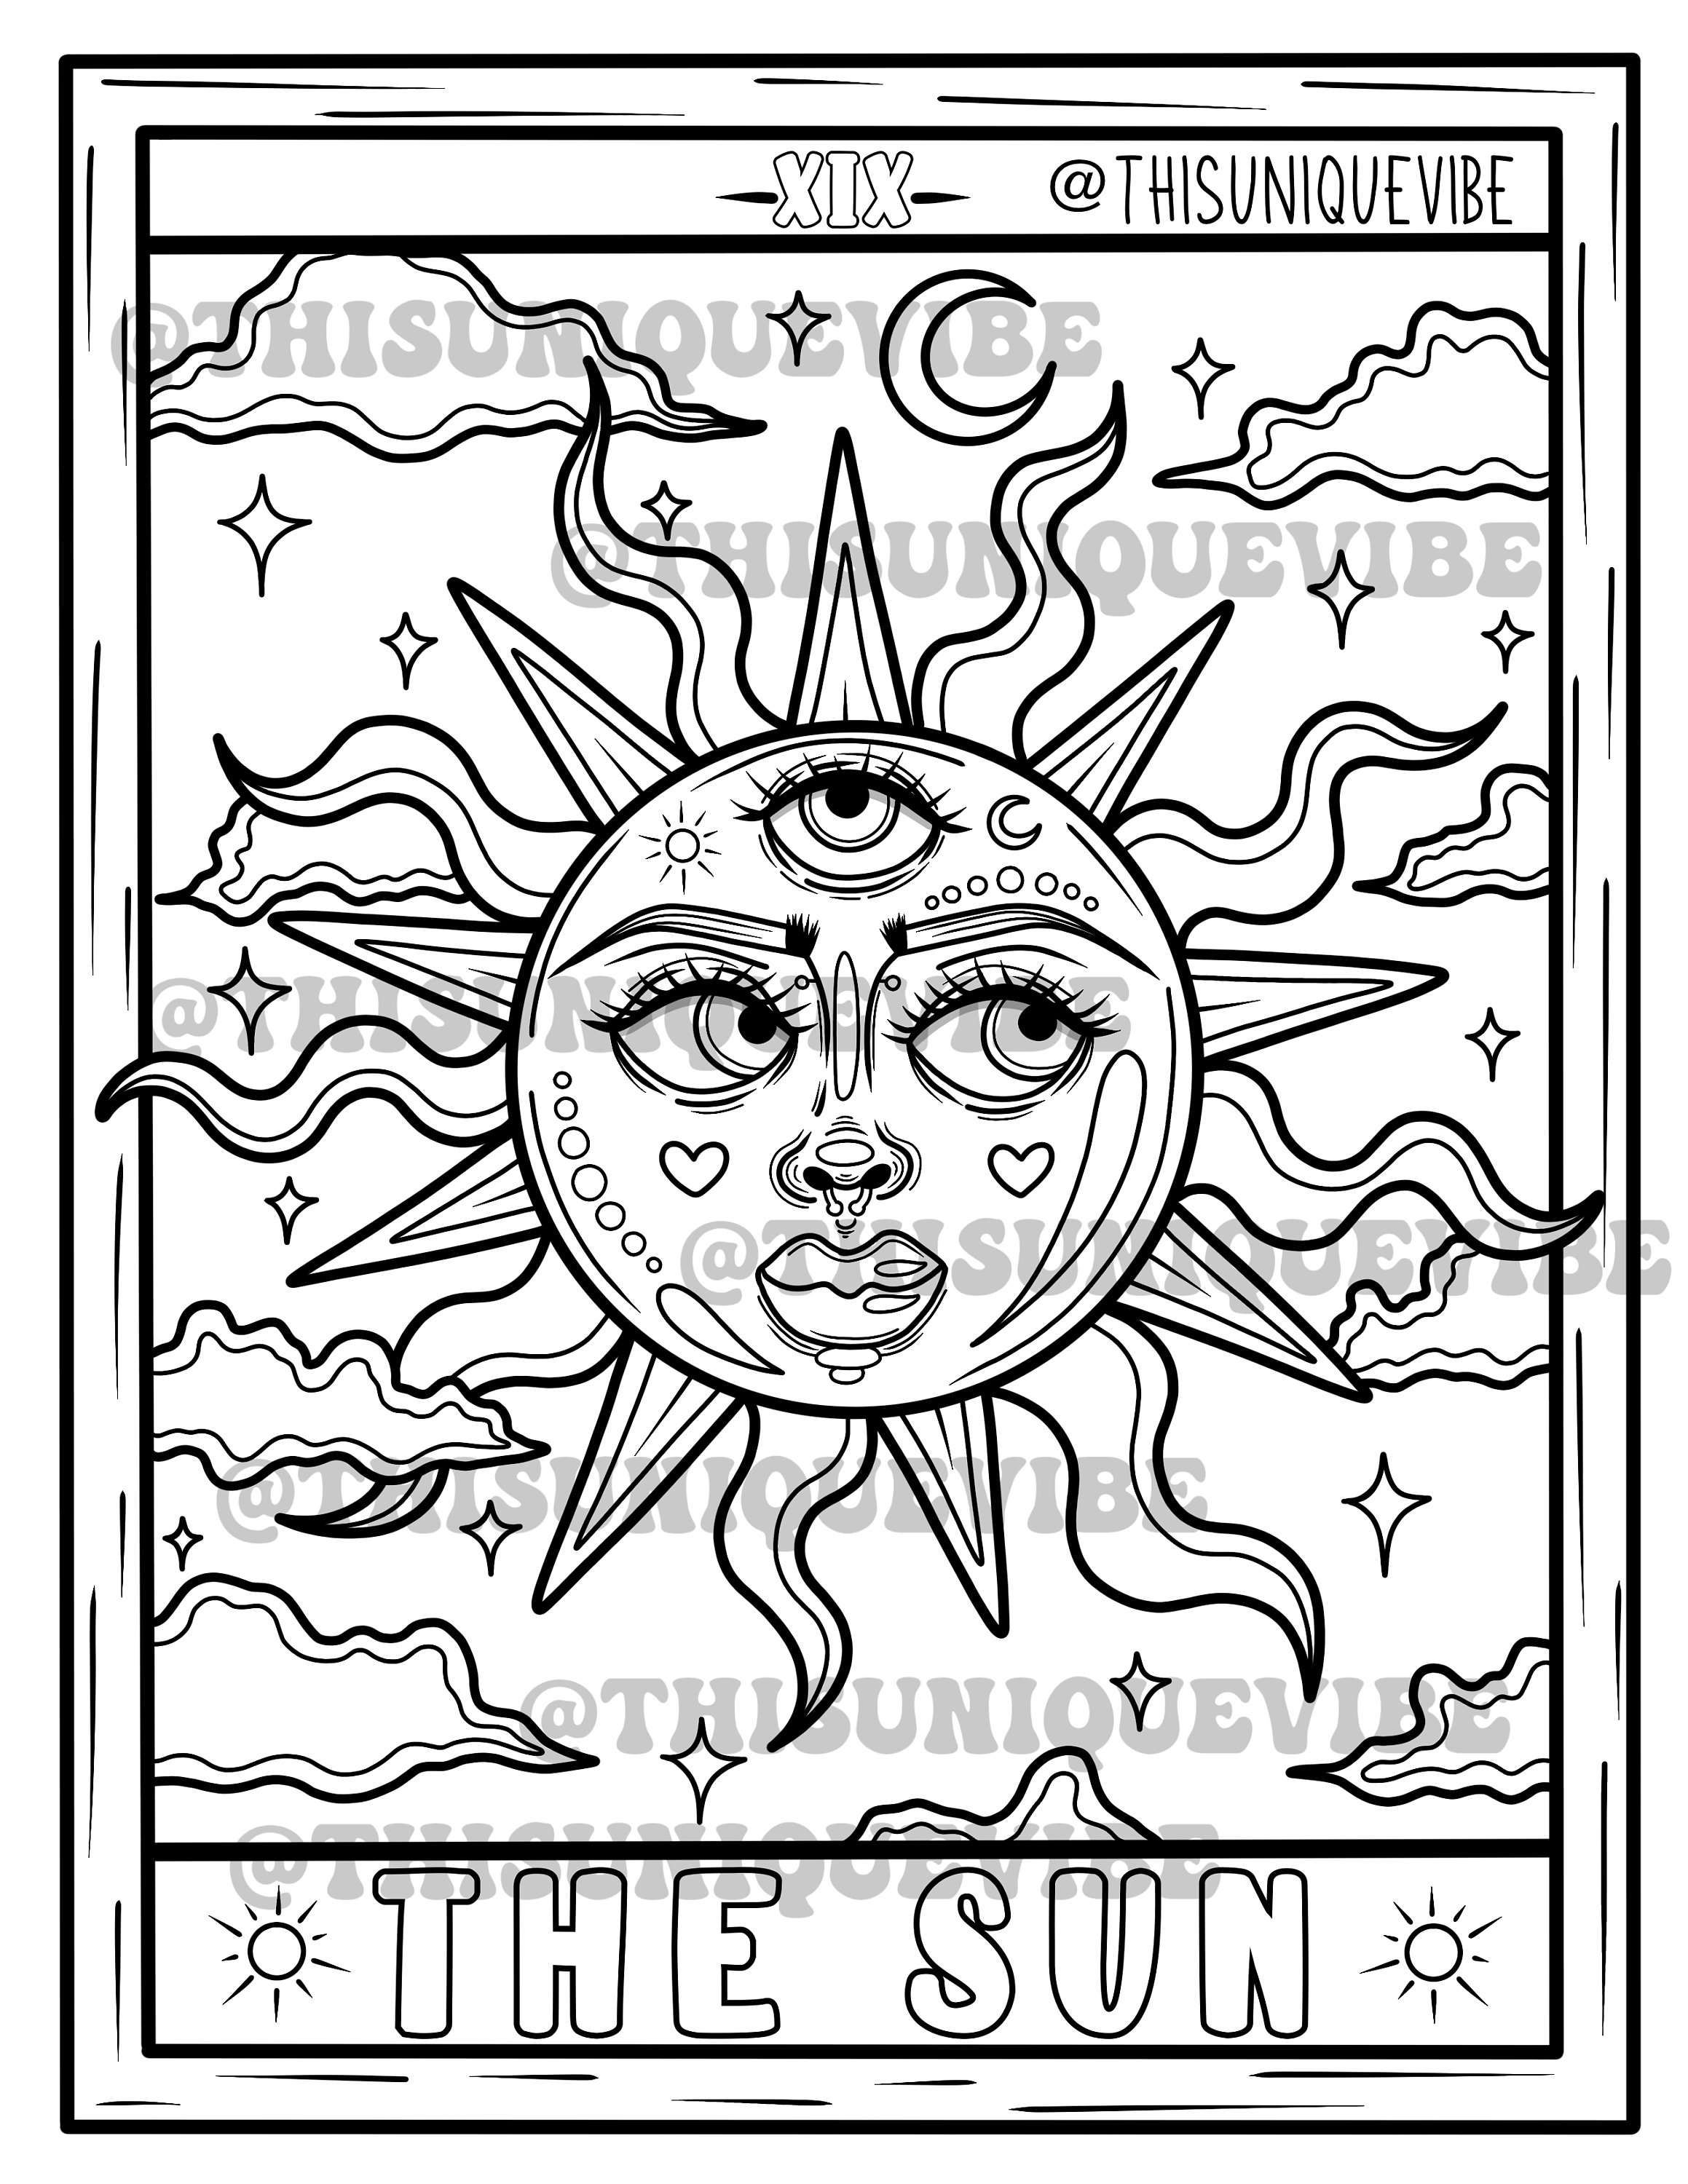 The sun tarot coloring page printable adult coloring page coloring book trippy coloring page trippy art hippie coloring page download now